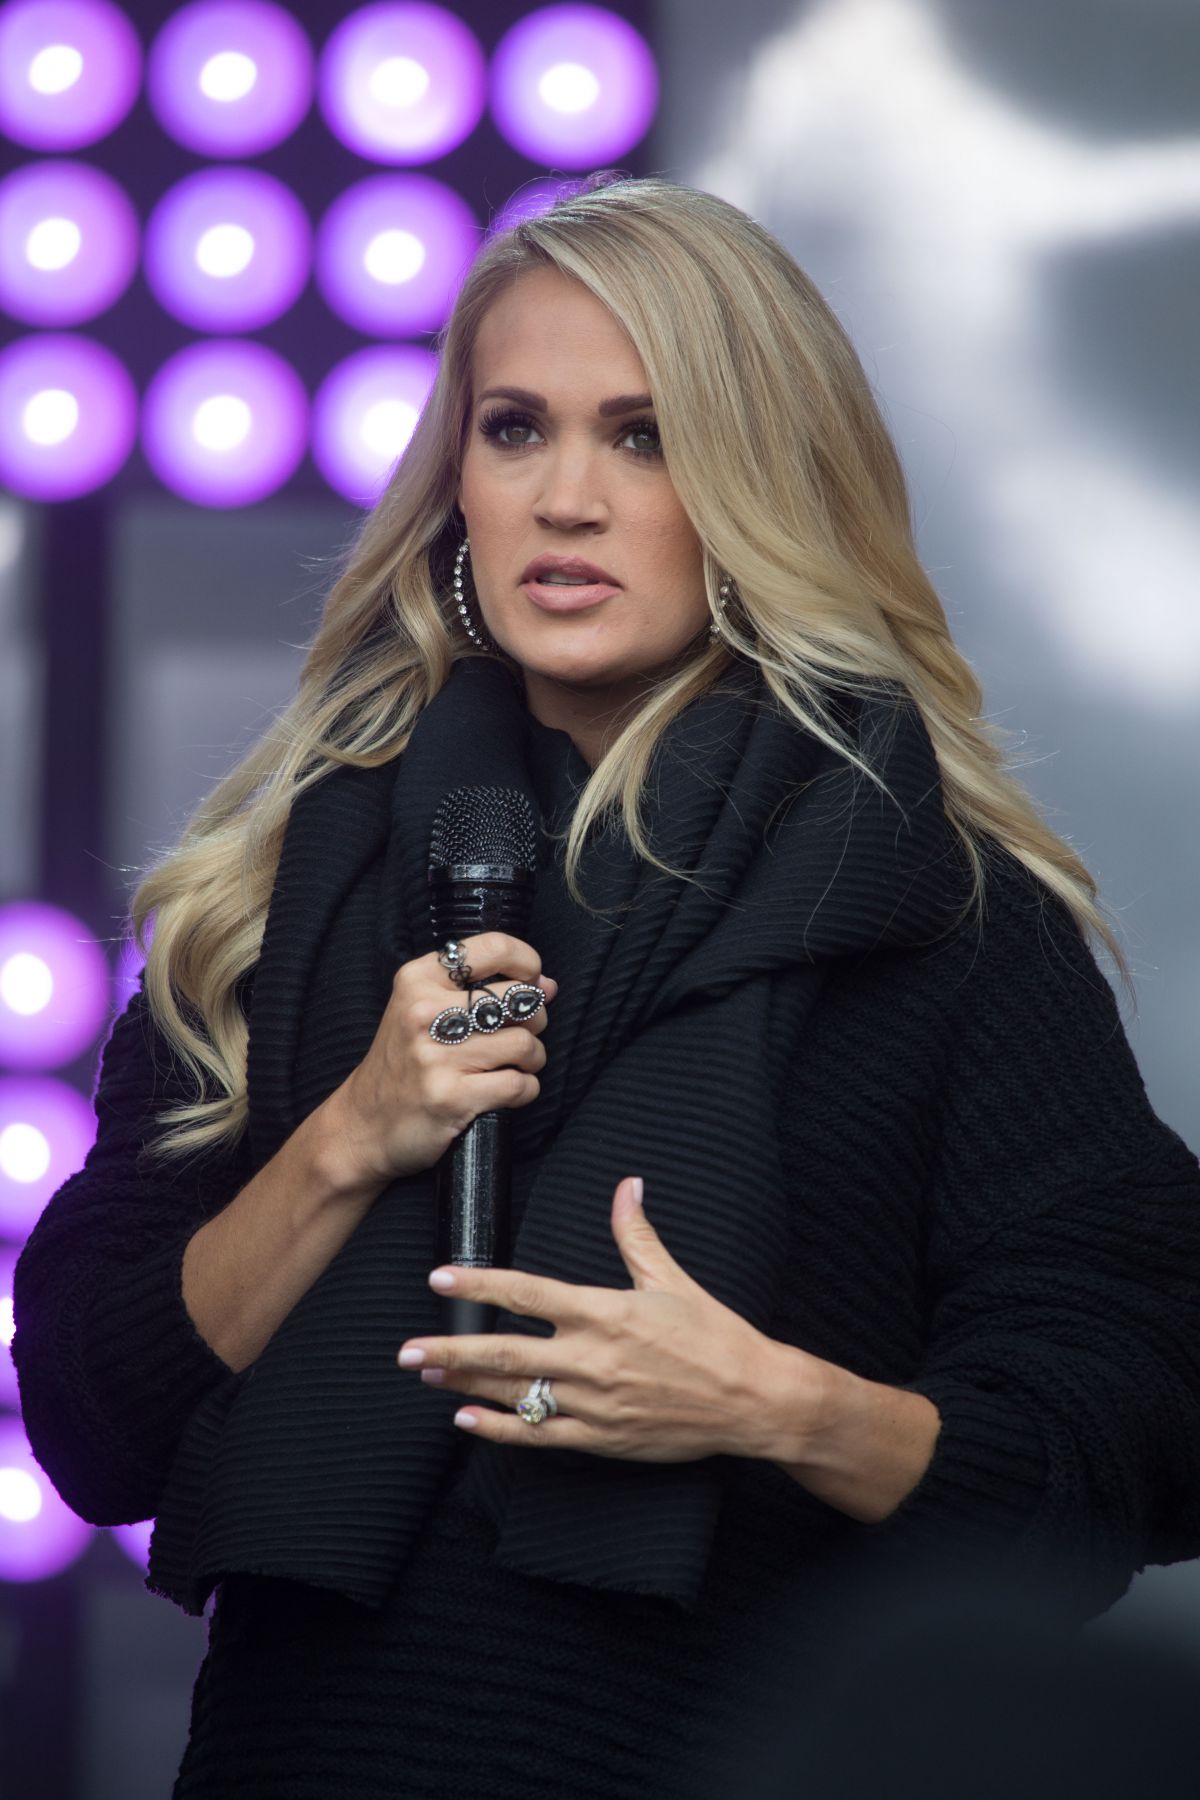 pregnant-carrie-underwood-performs-at-federation-square-in-melbourne-09-27-2018-2.jpg